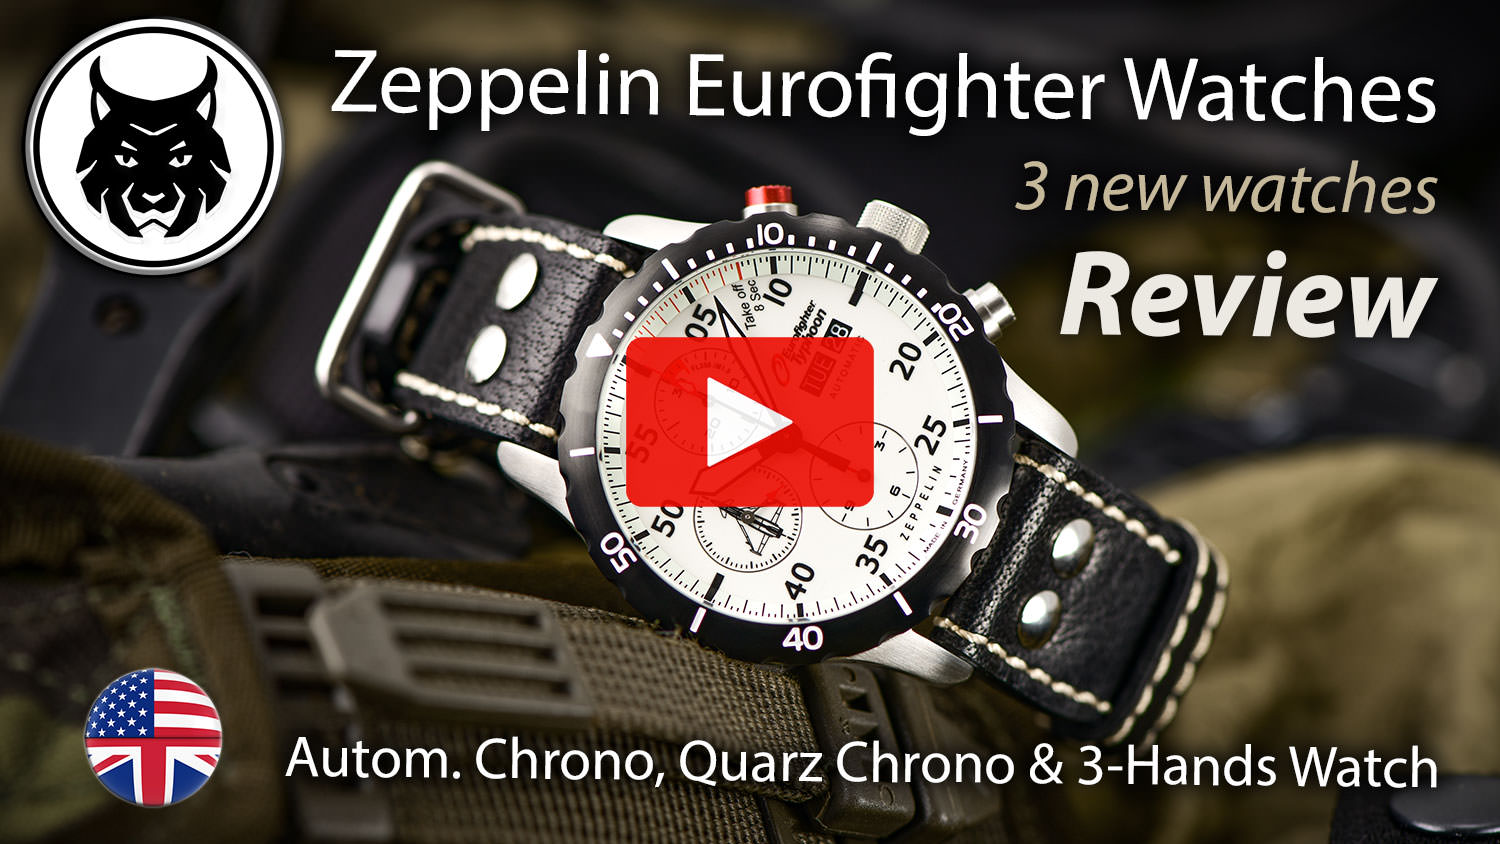 YouTube Video Review - All three watches - © 2021 by WATCHDAVID® - All rights reserved